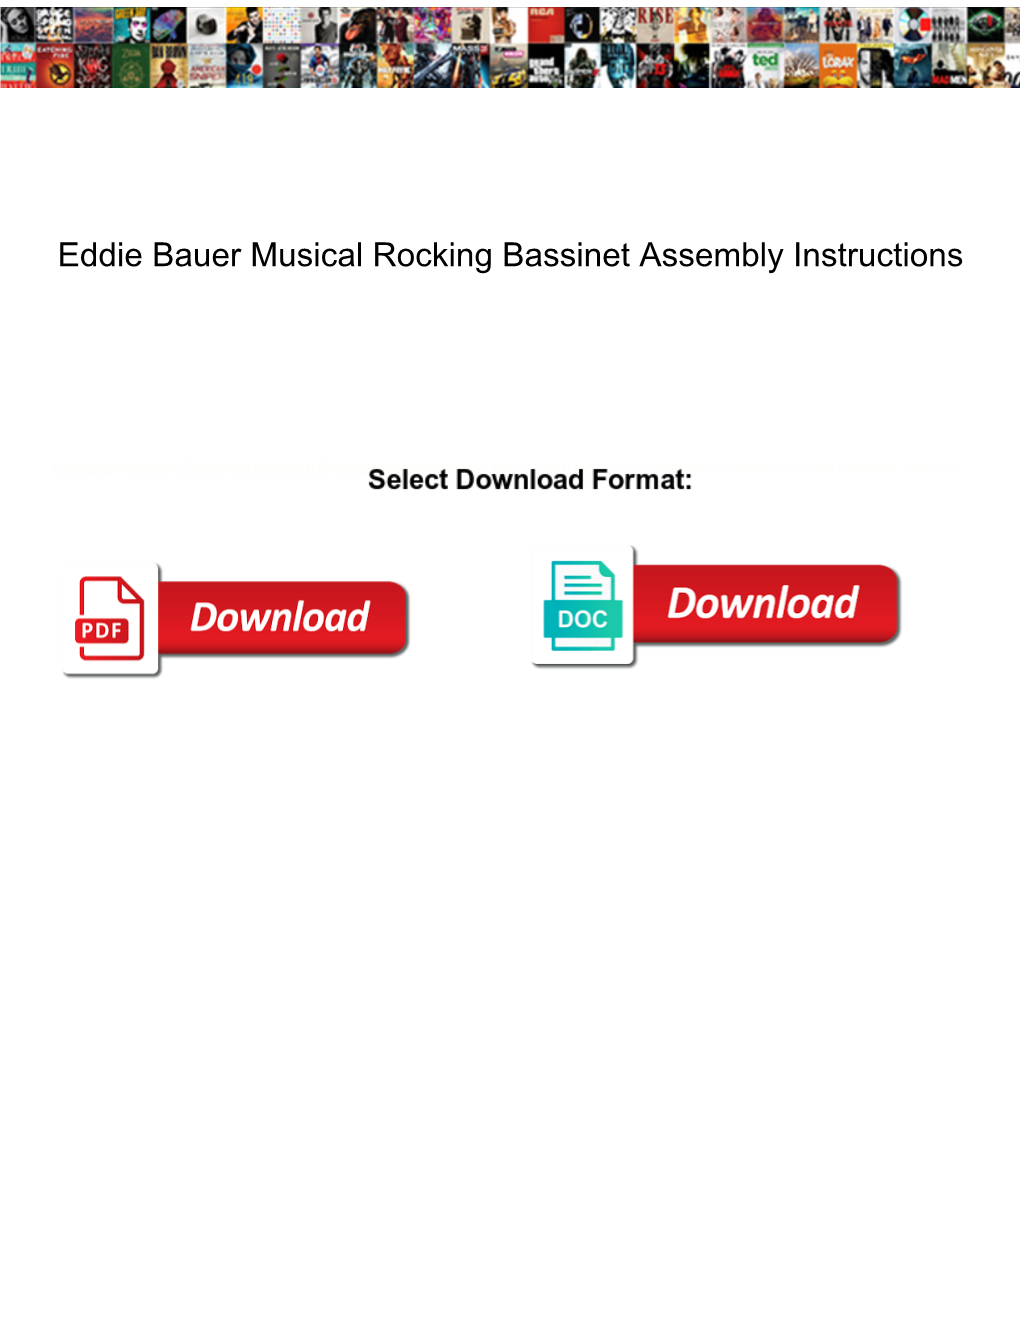 Eddie Bauer Musical Rocking Bassinet Assembly Instructions